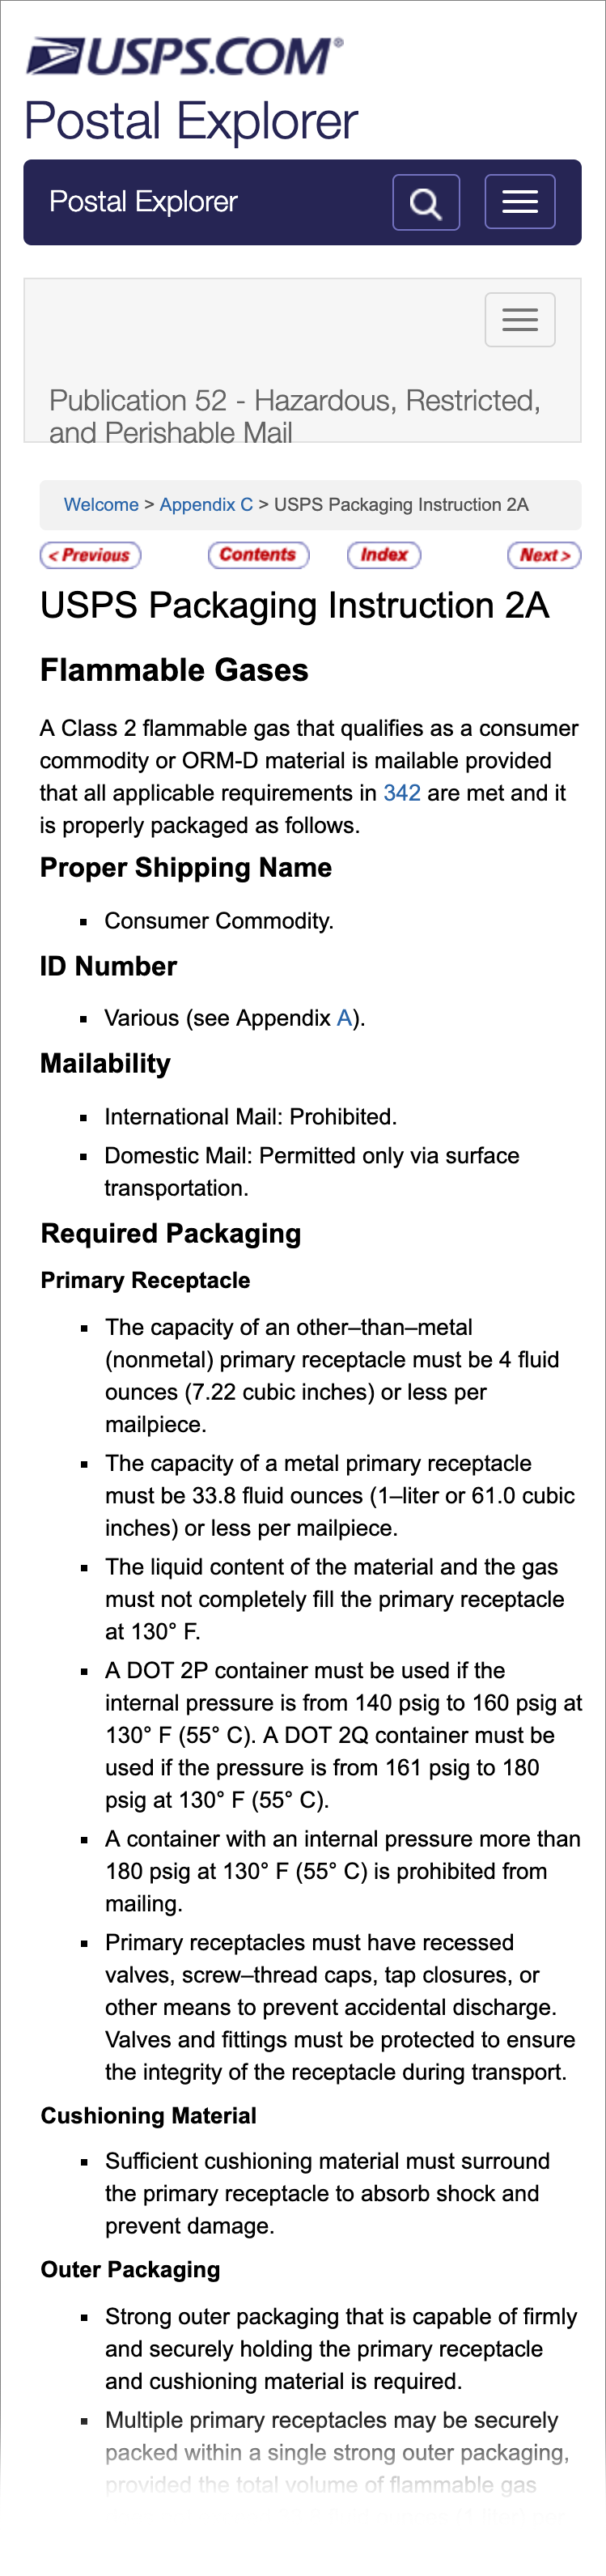 USPS packaging instruction 2A for flammable gases.